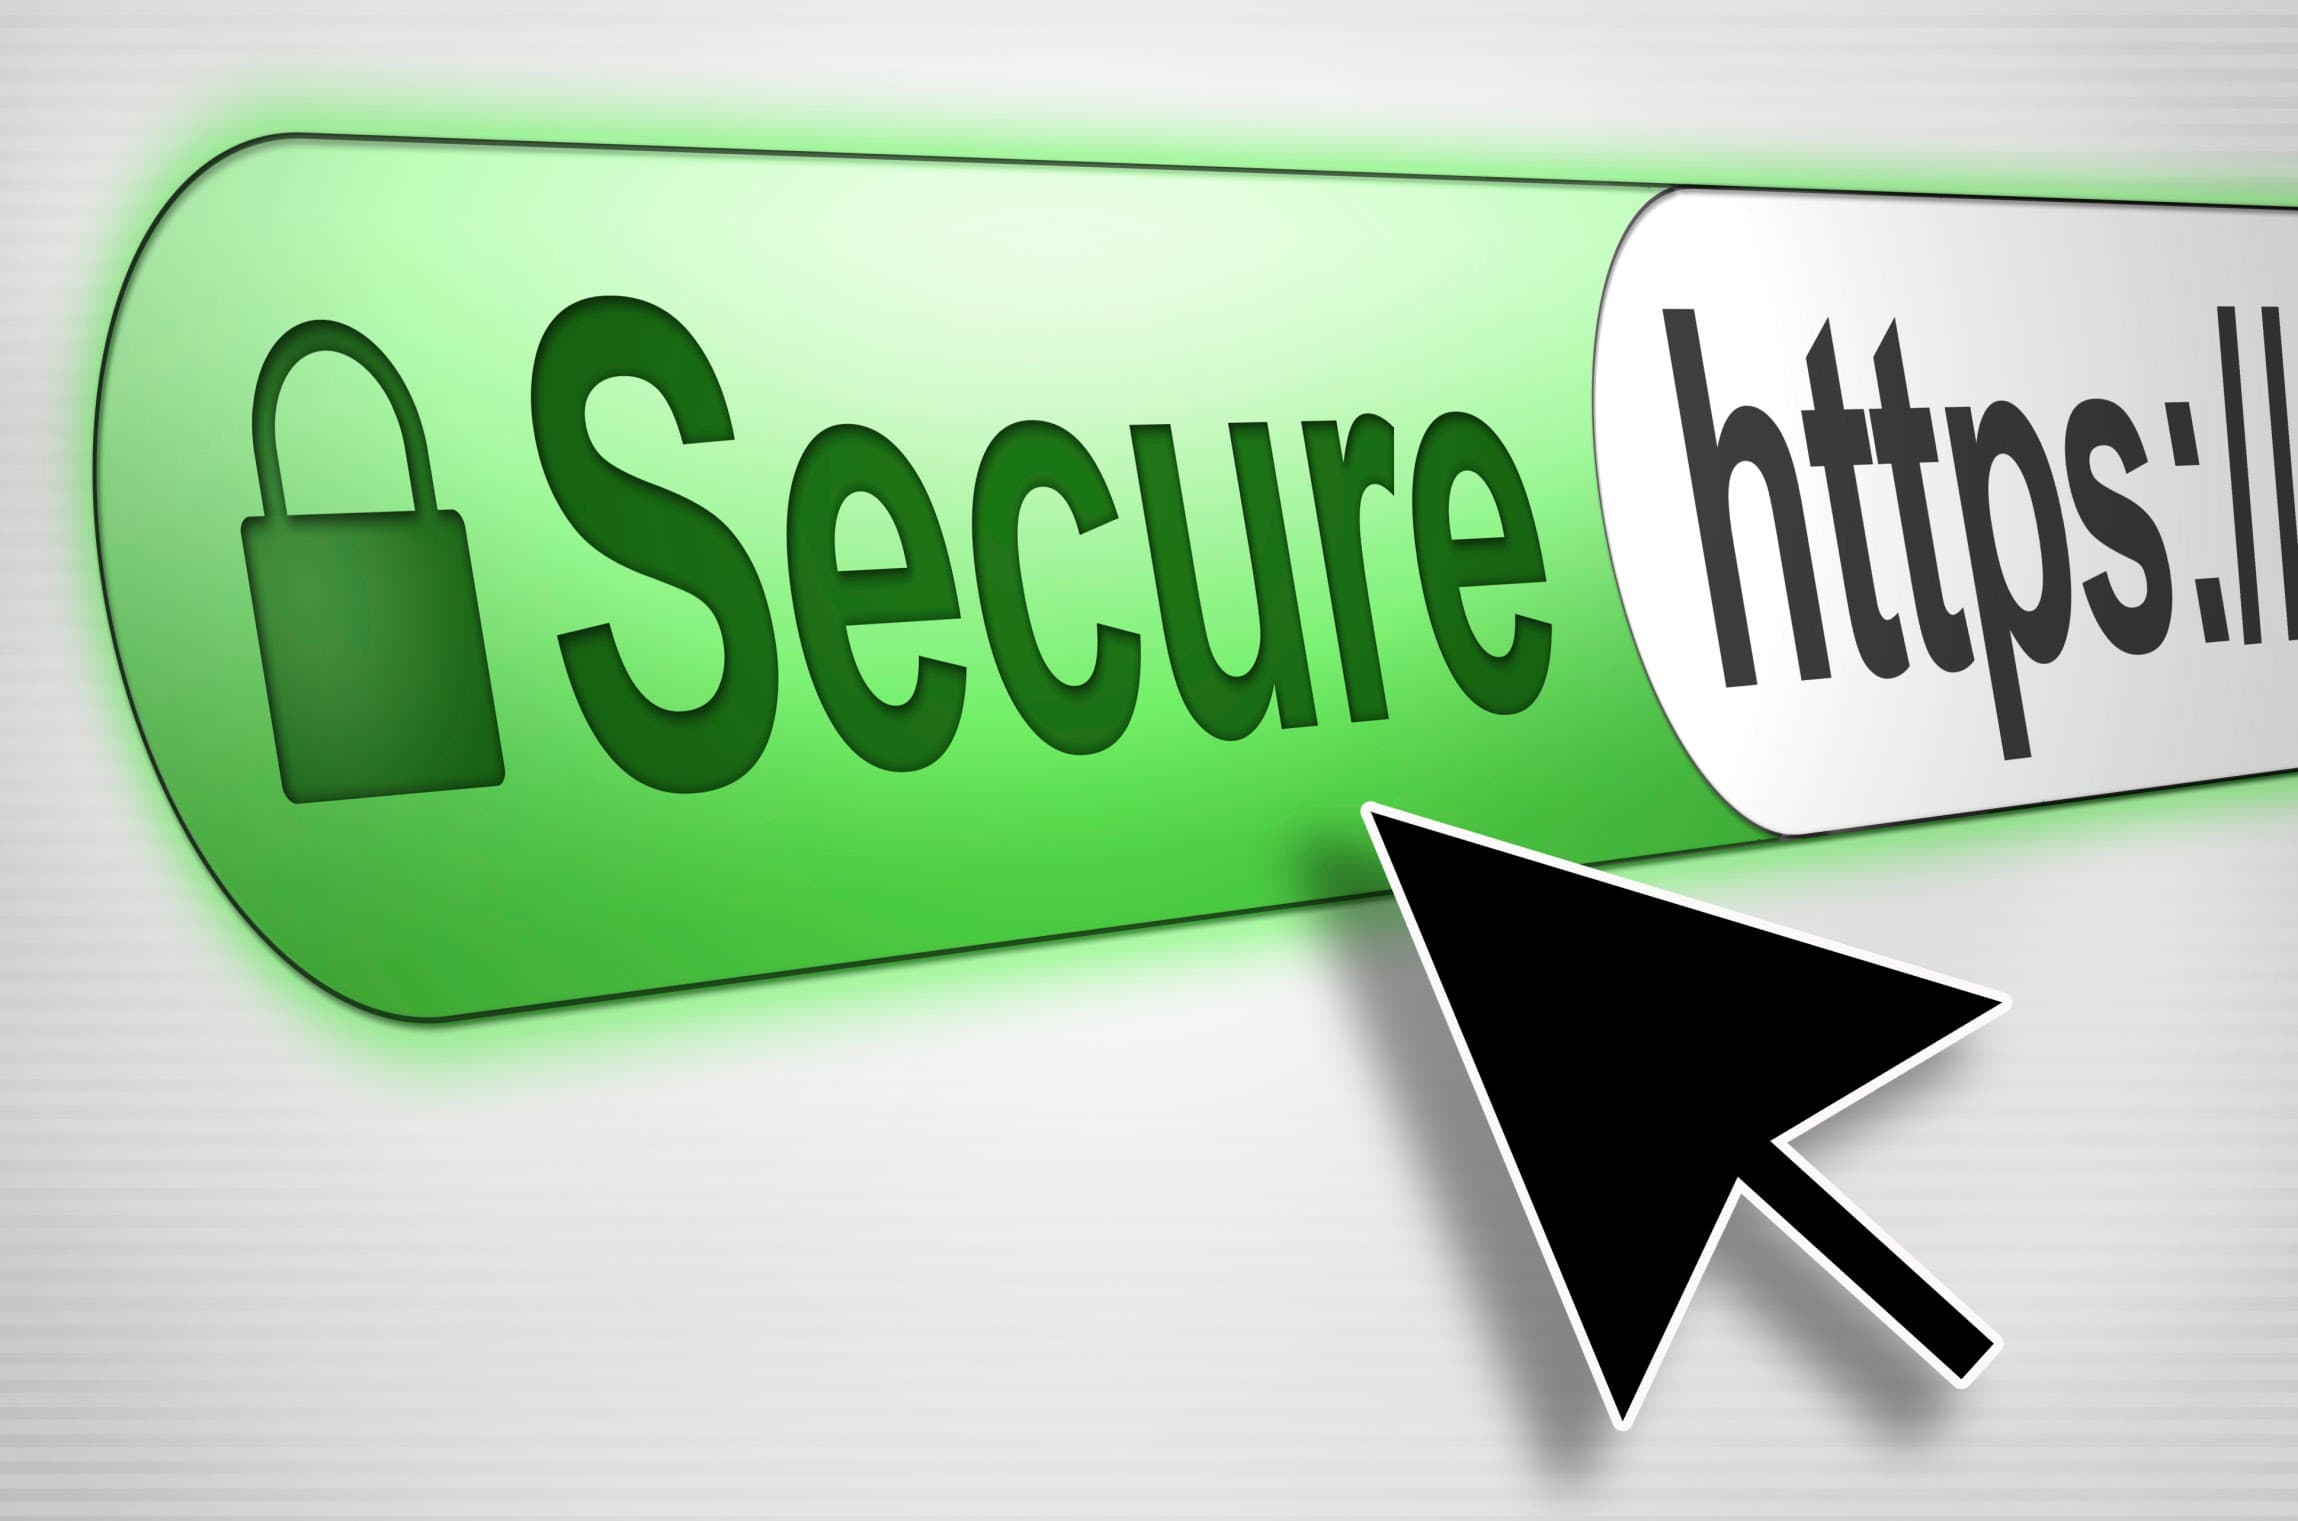 How does ssl certificate work